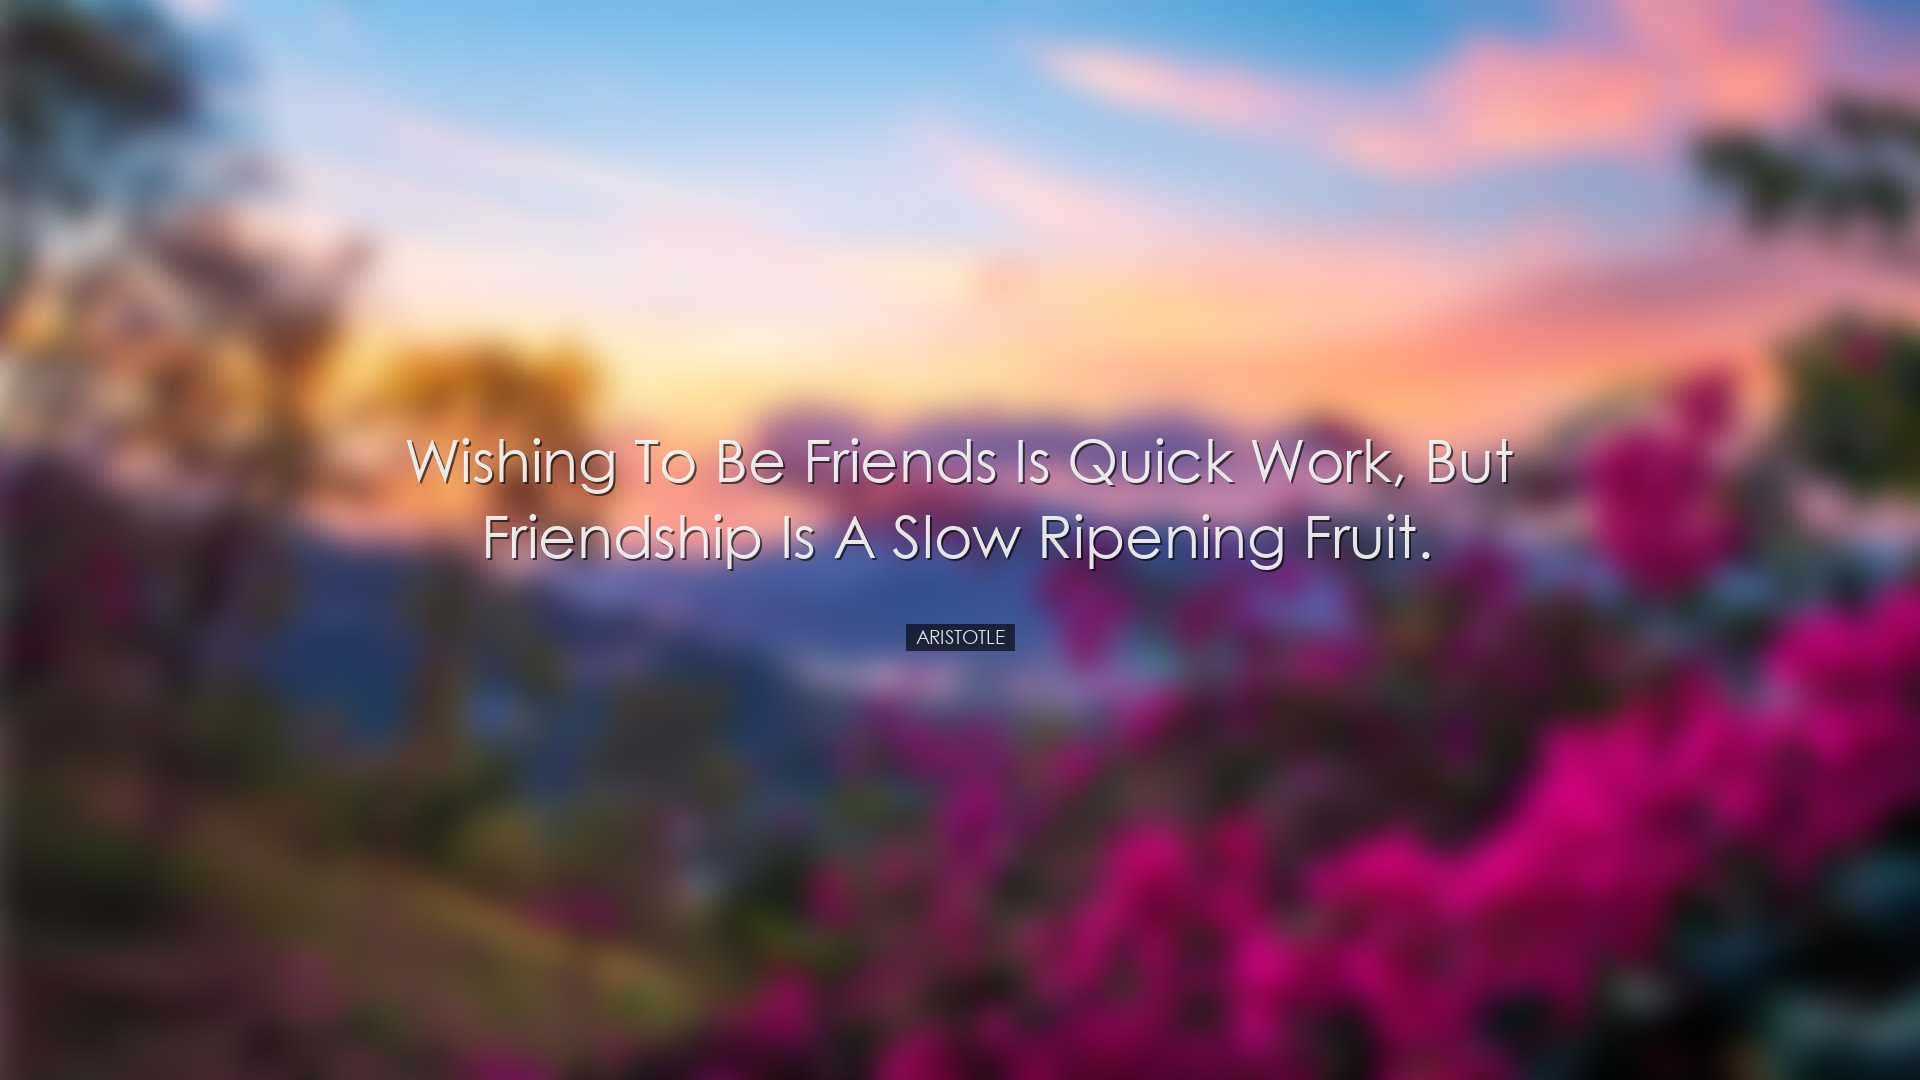 Wishing to be friends is quick work, but friendship is a slow ripe